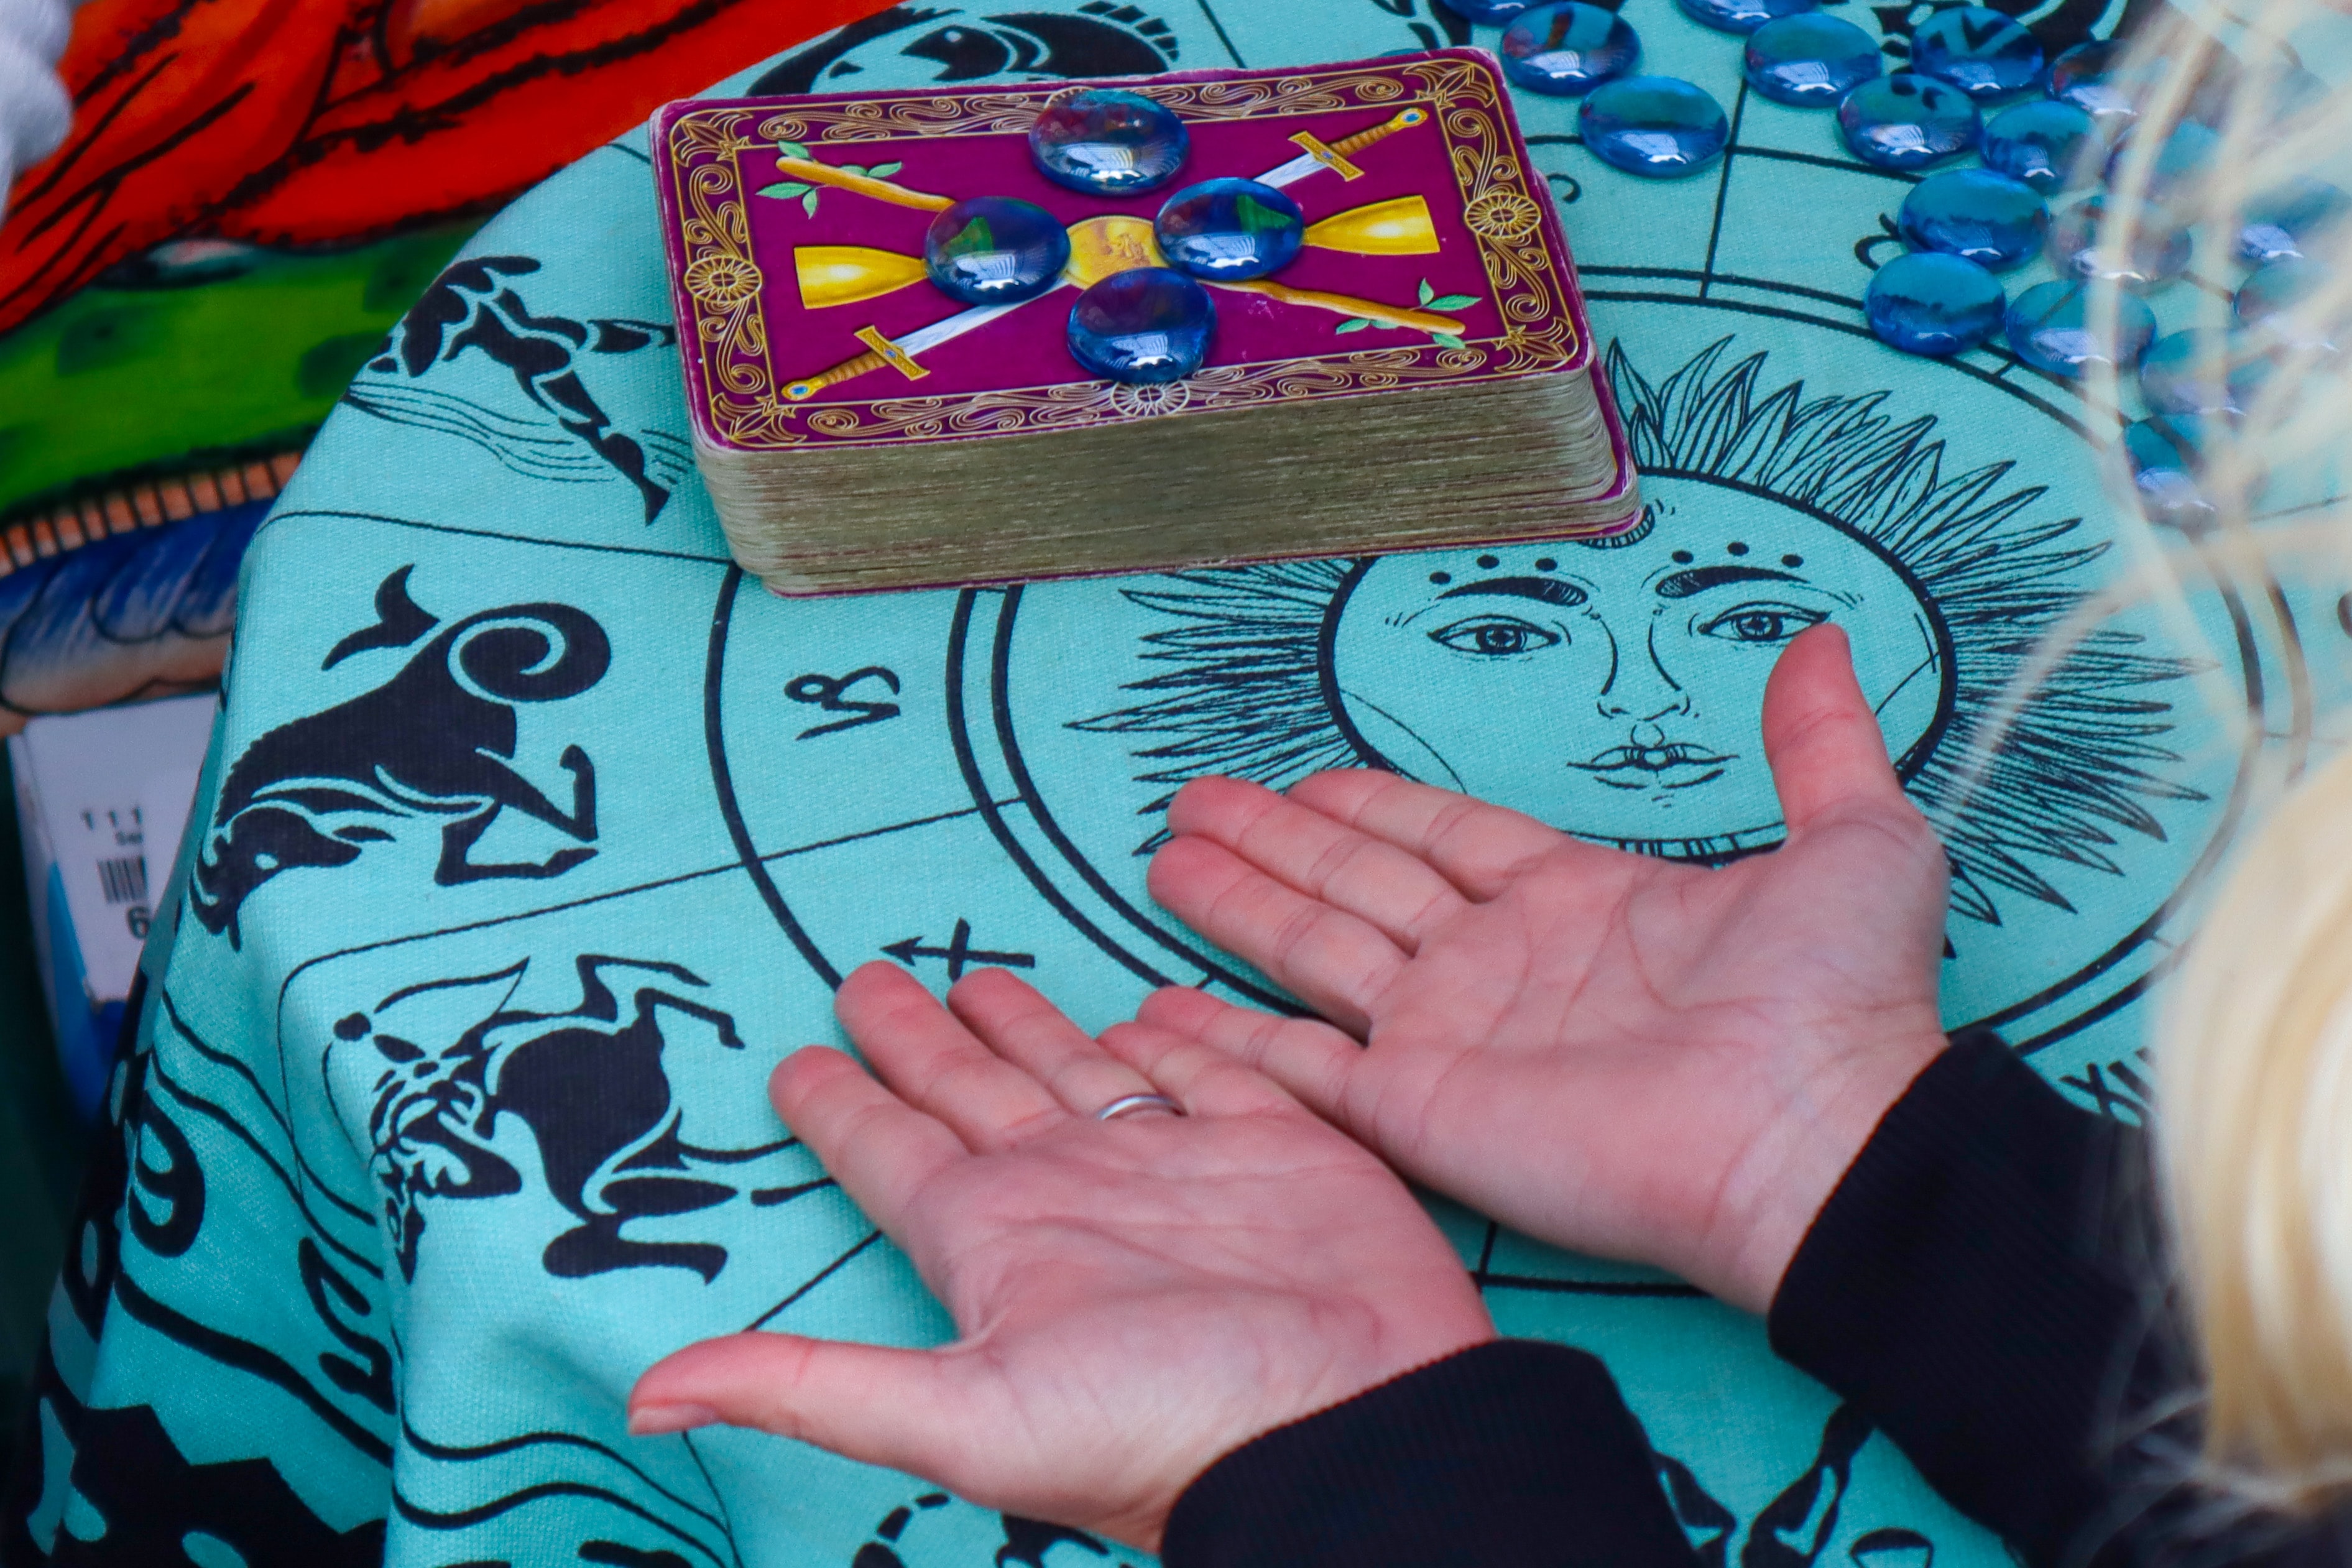 A person places their hands, palms up, on a table printed with zodiac signs.